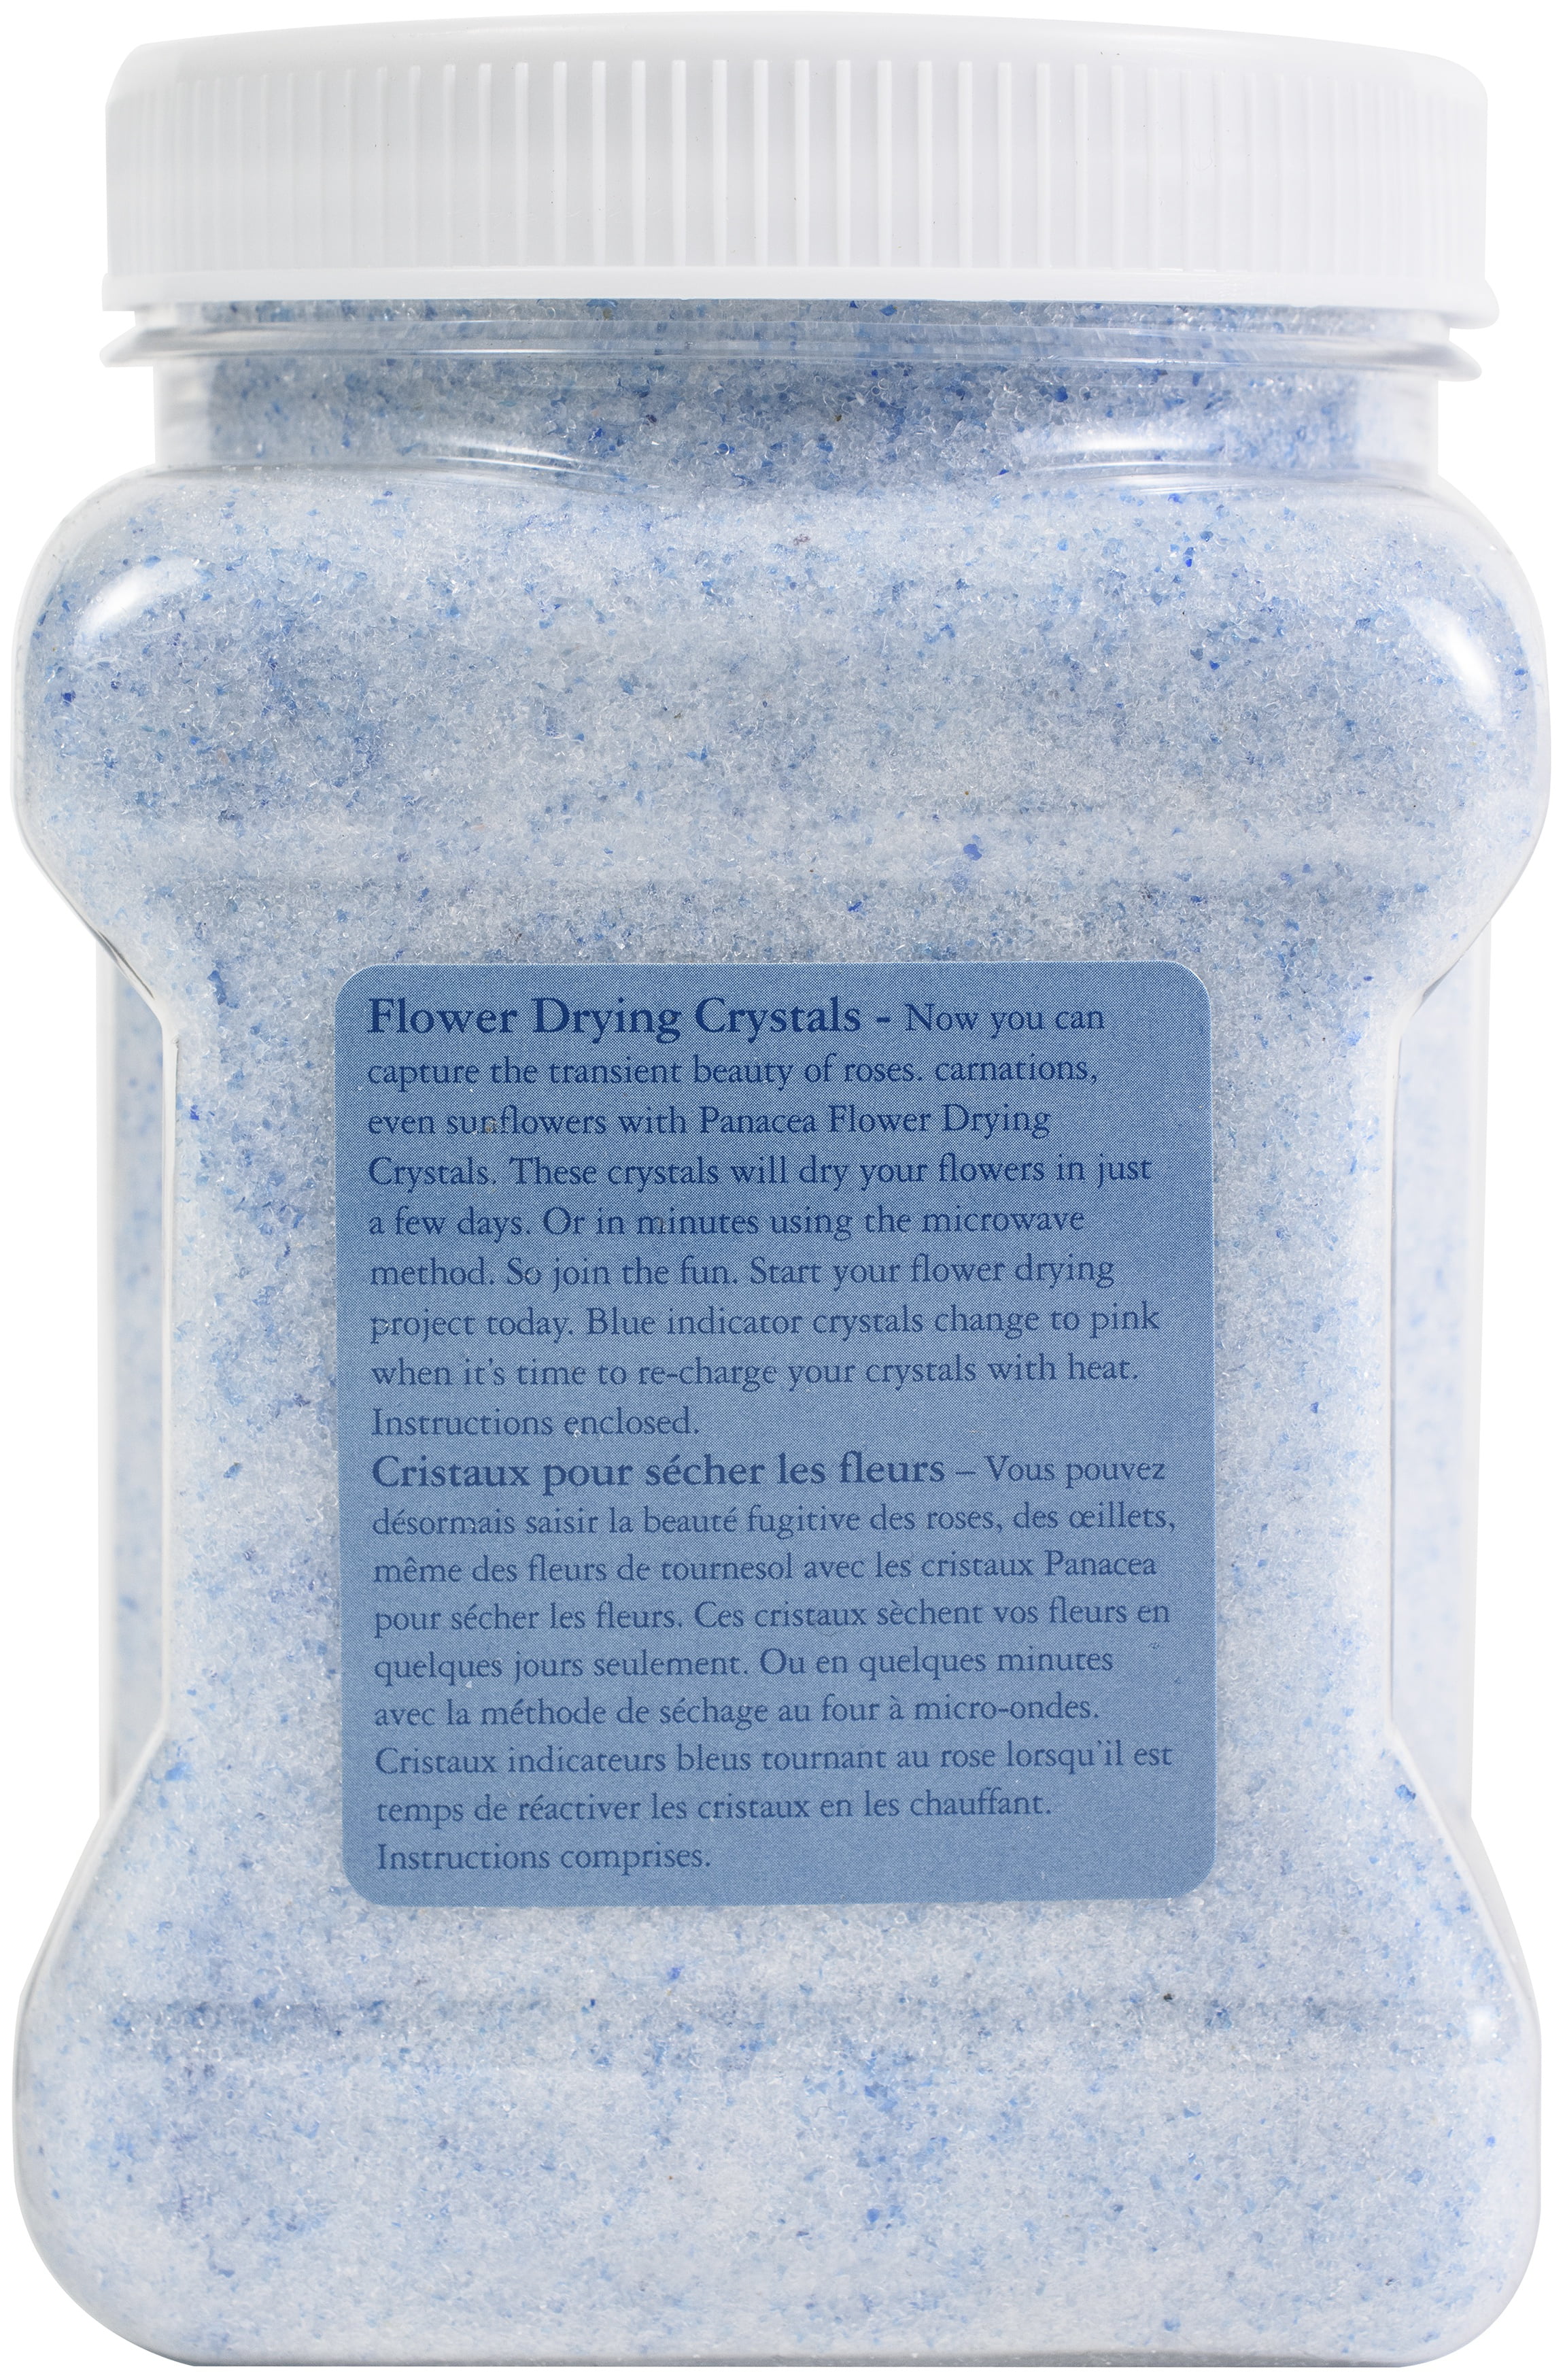 Wisedry Silica Gel Crystal for Flowers Drying - 2 lbs, Color Indicating, Reusable